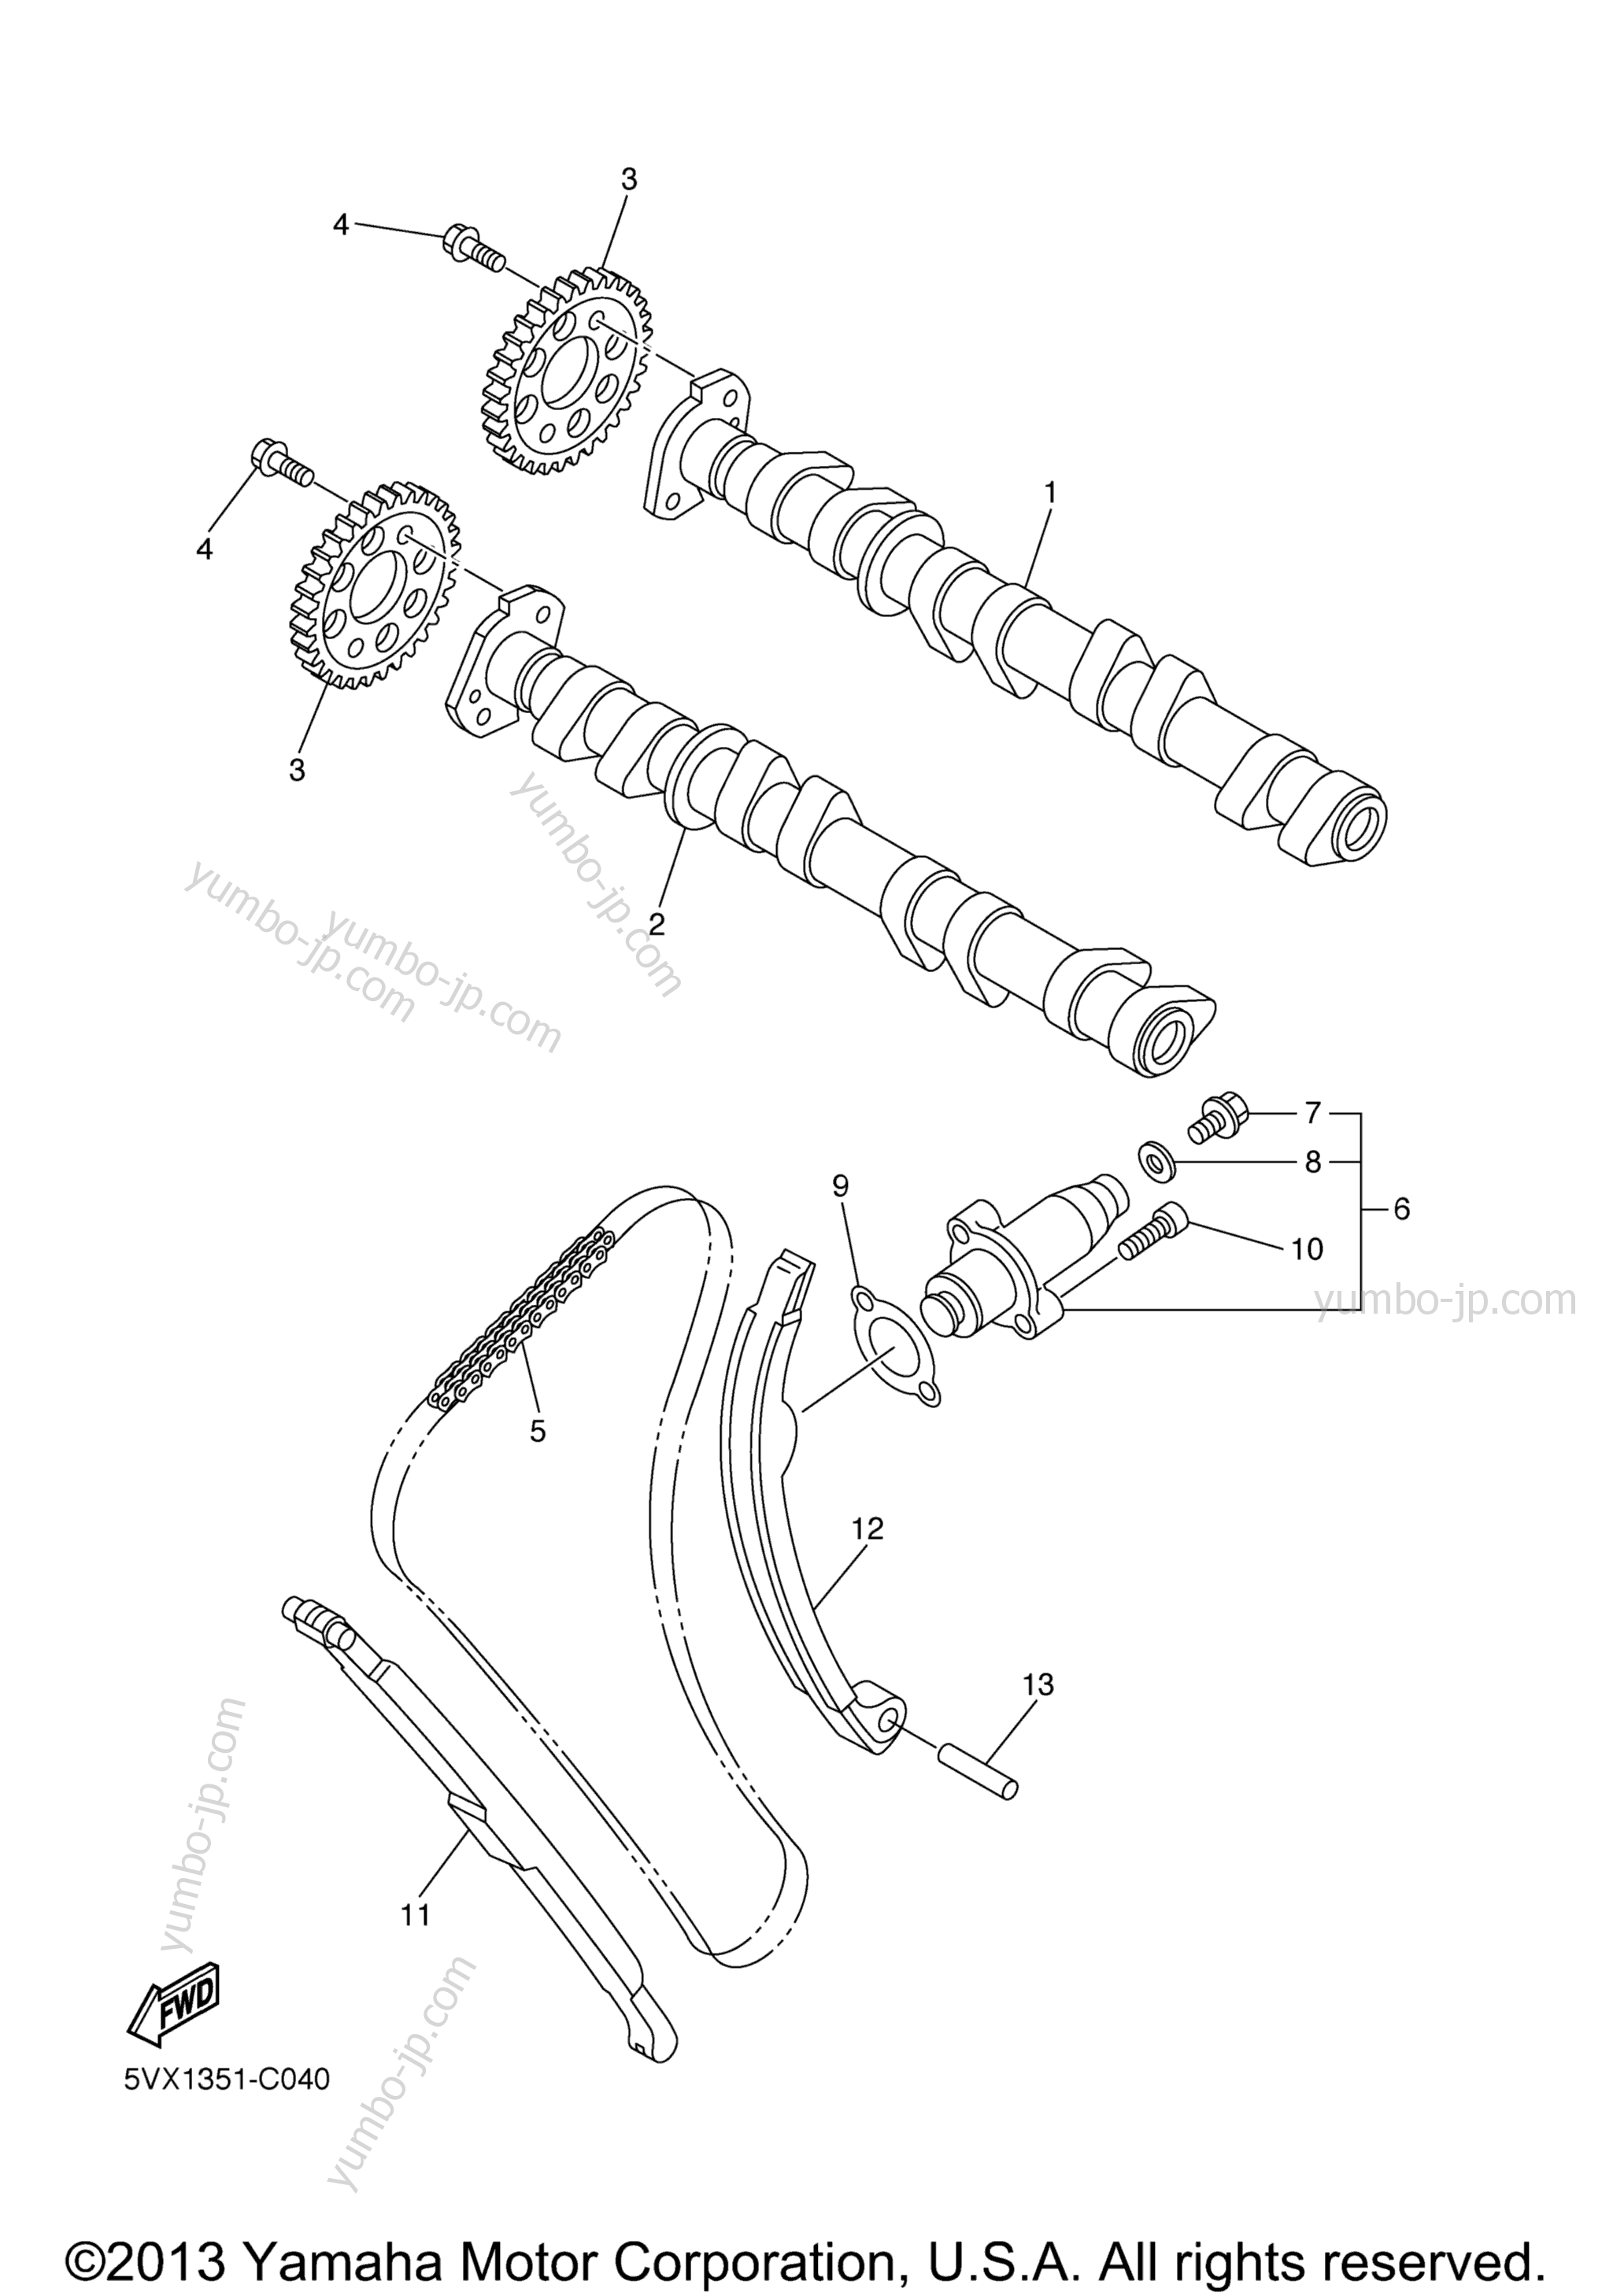 Camshaft Chain for motorcycles YAMAHA FZ6 (FZS6T) 2005 year